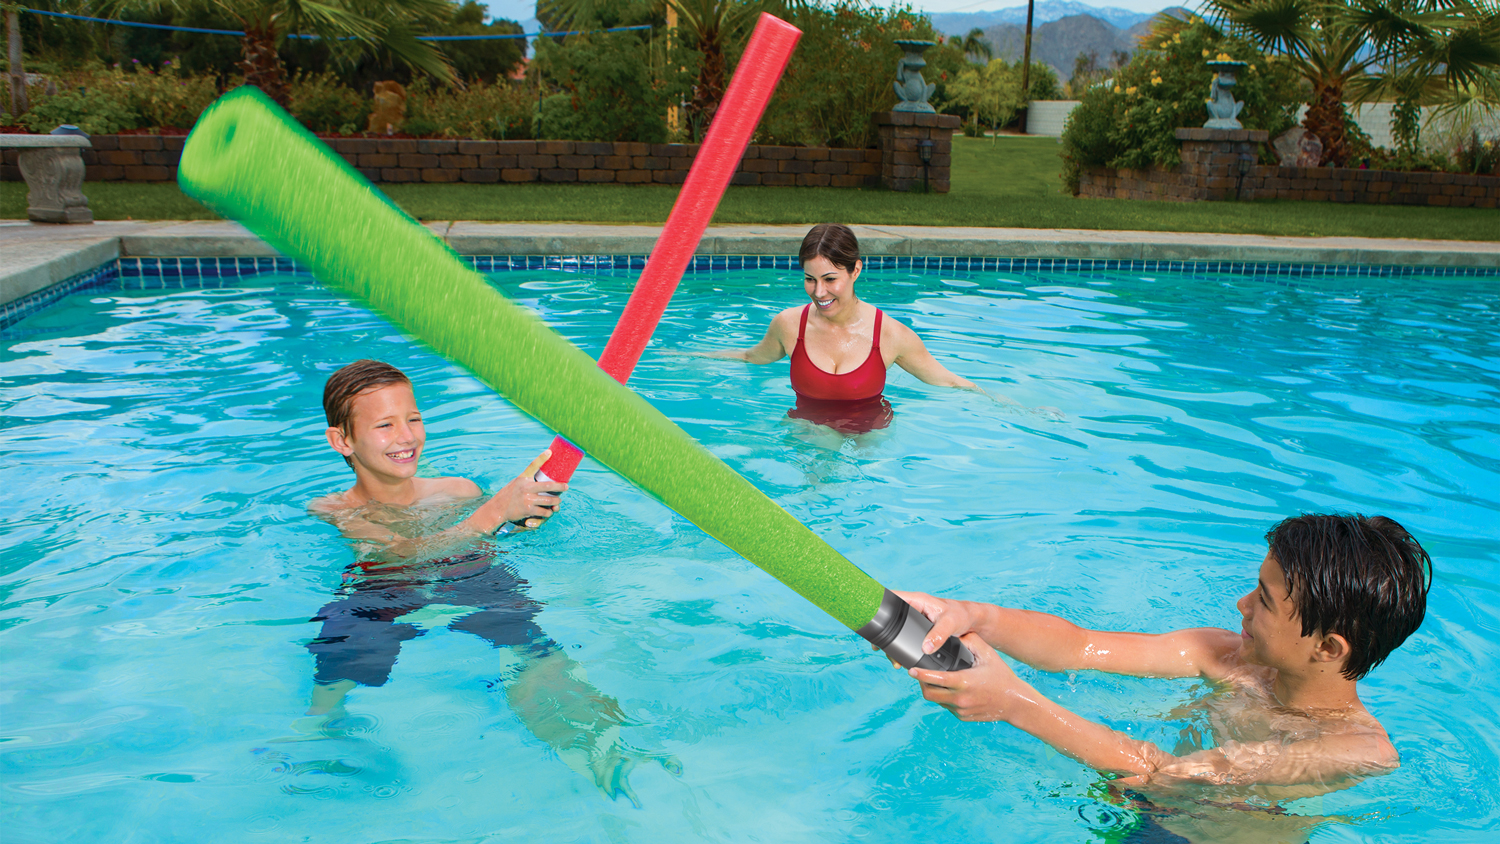 Has It Really Taken This Long For Lightsaber Pool Noodles To Exist?